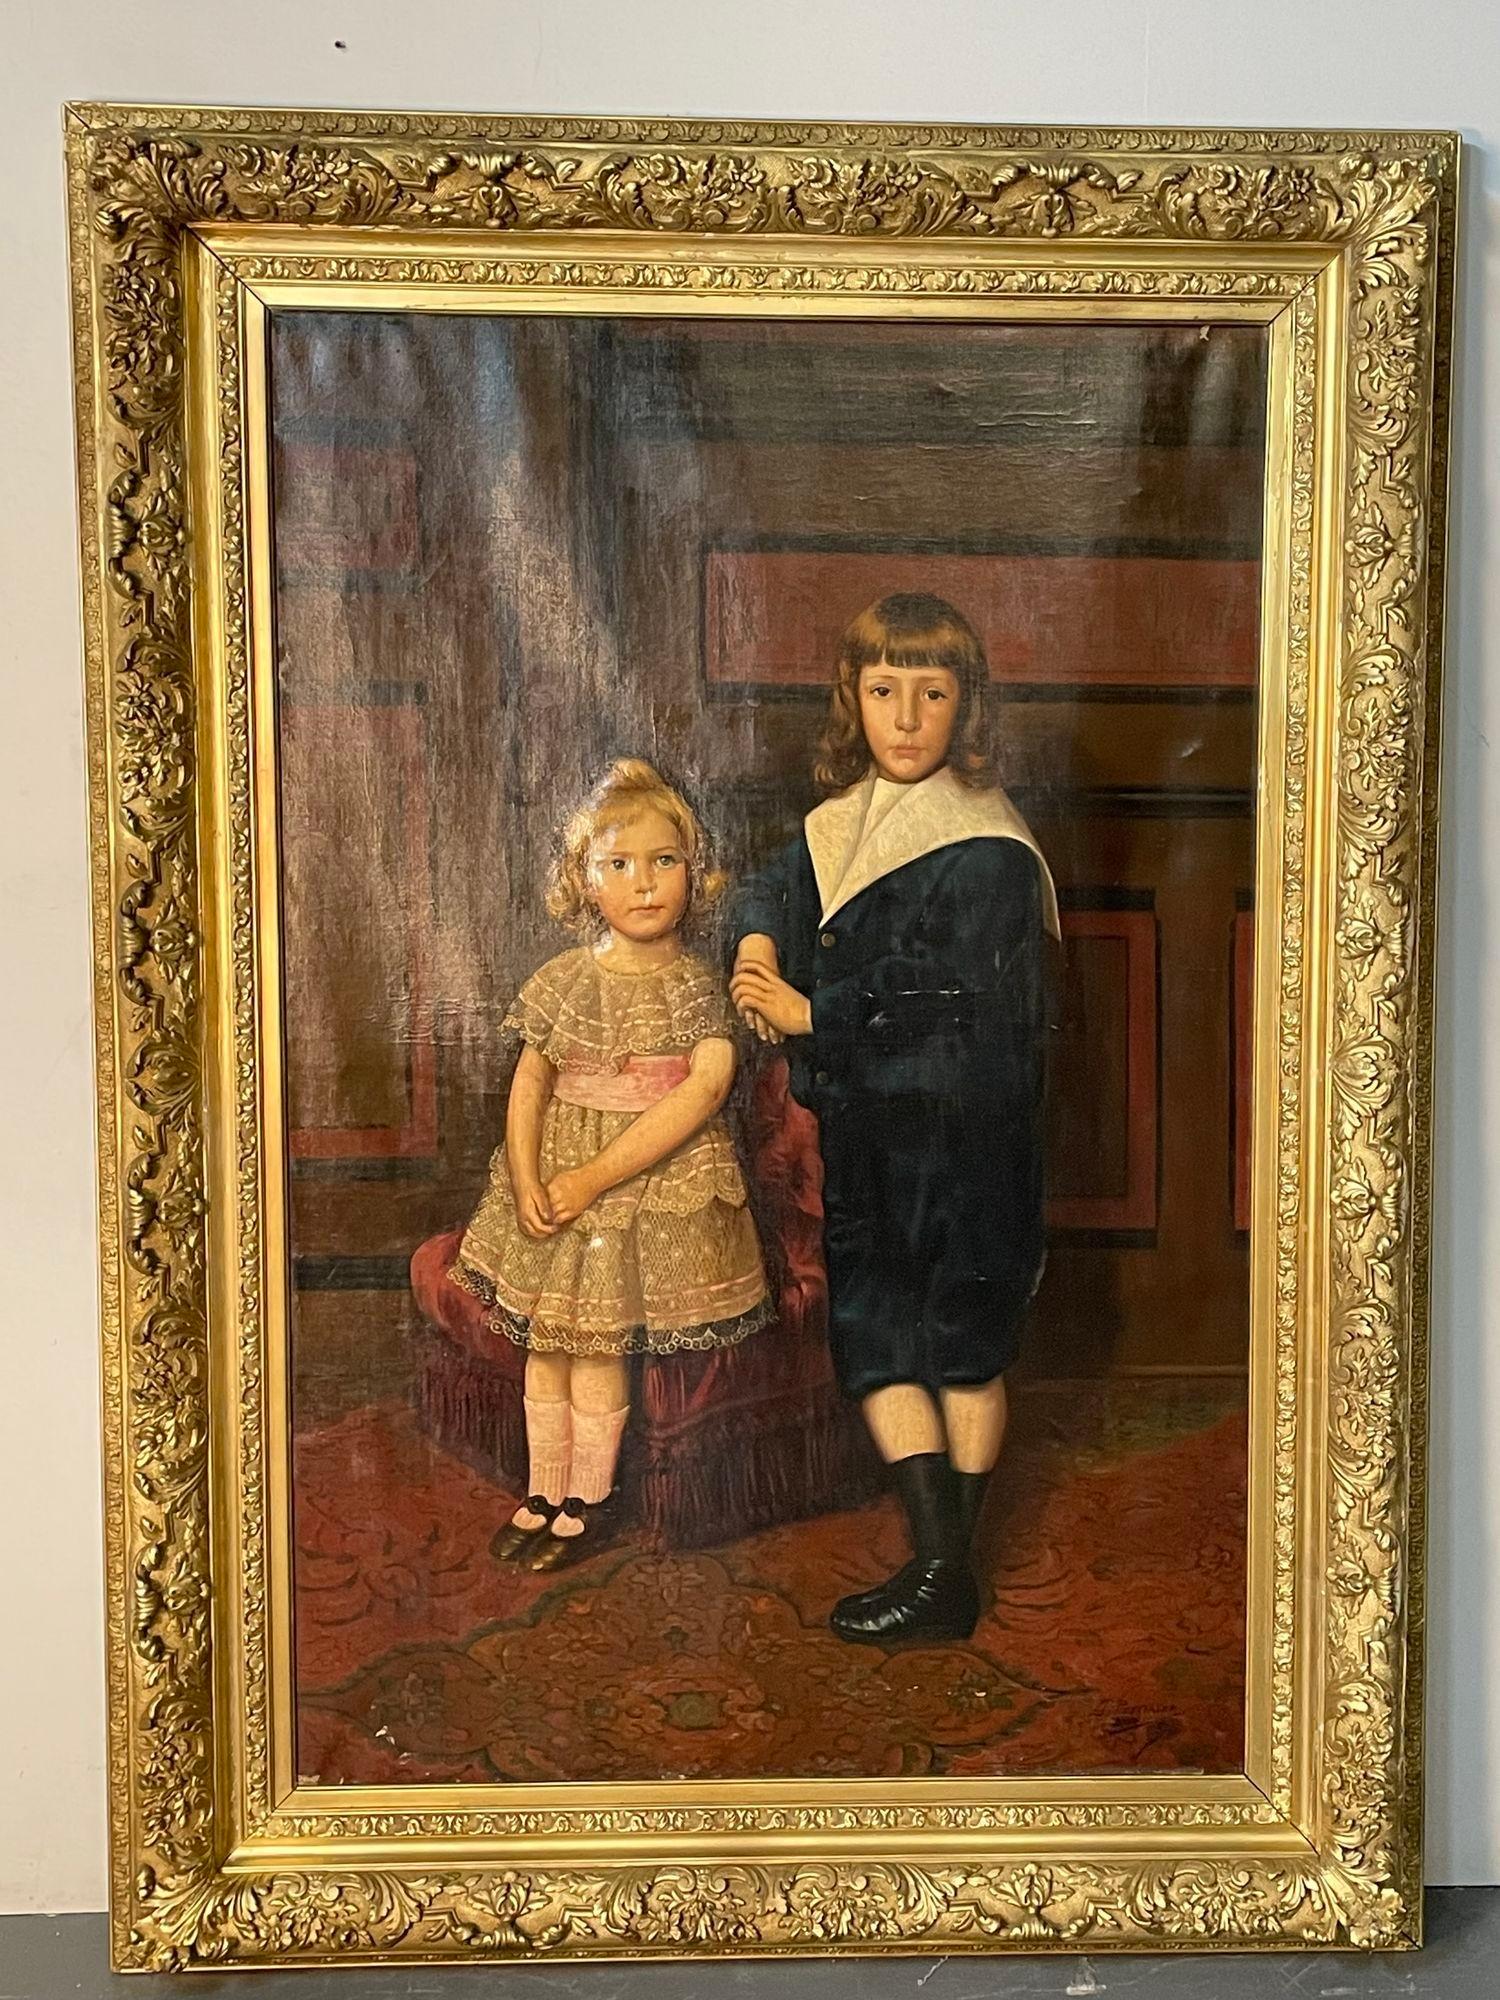 A palatial oil on canvas of a portrait of siblings signed J. Peellaert. A finely detailed oil on canvas of a boy and his sister by J Peellaert. Unframed this painting measures 63